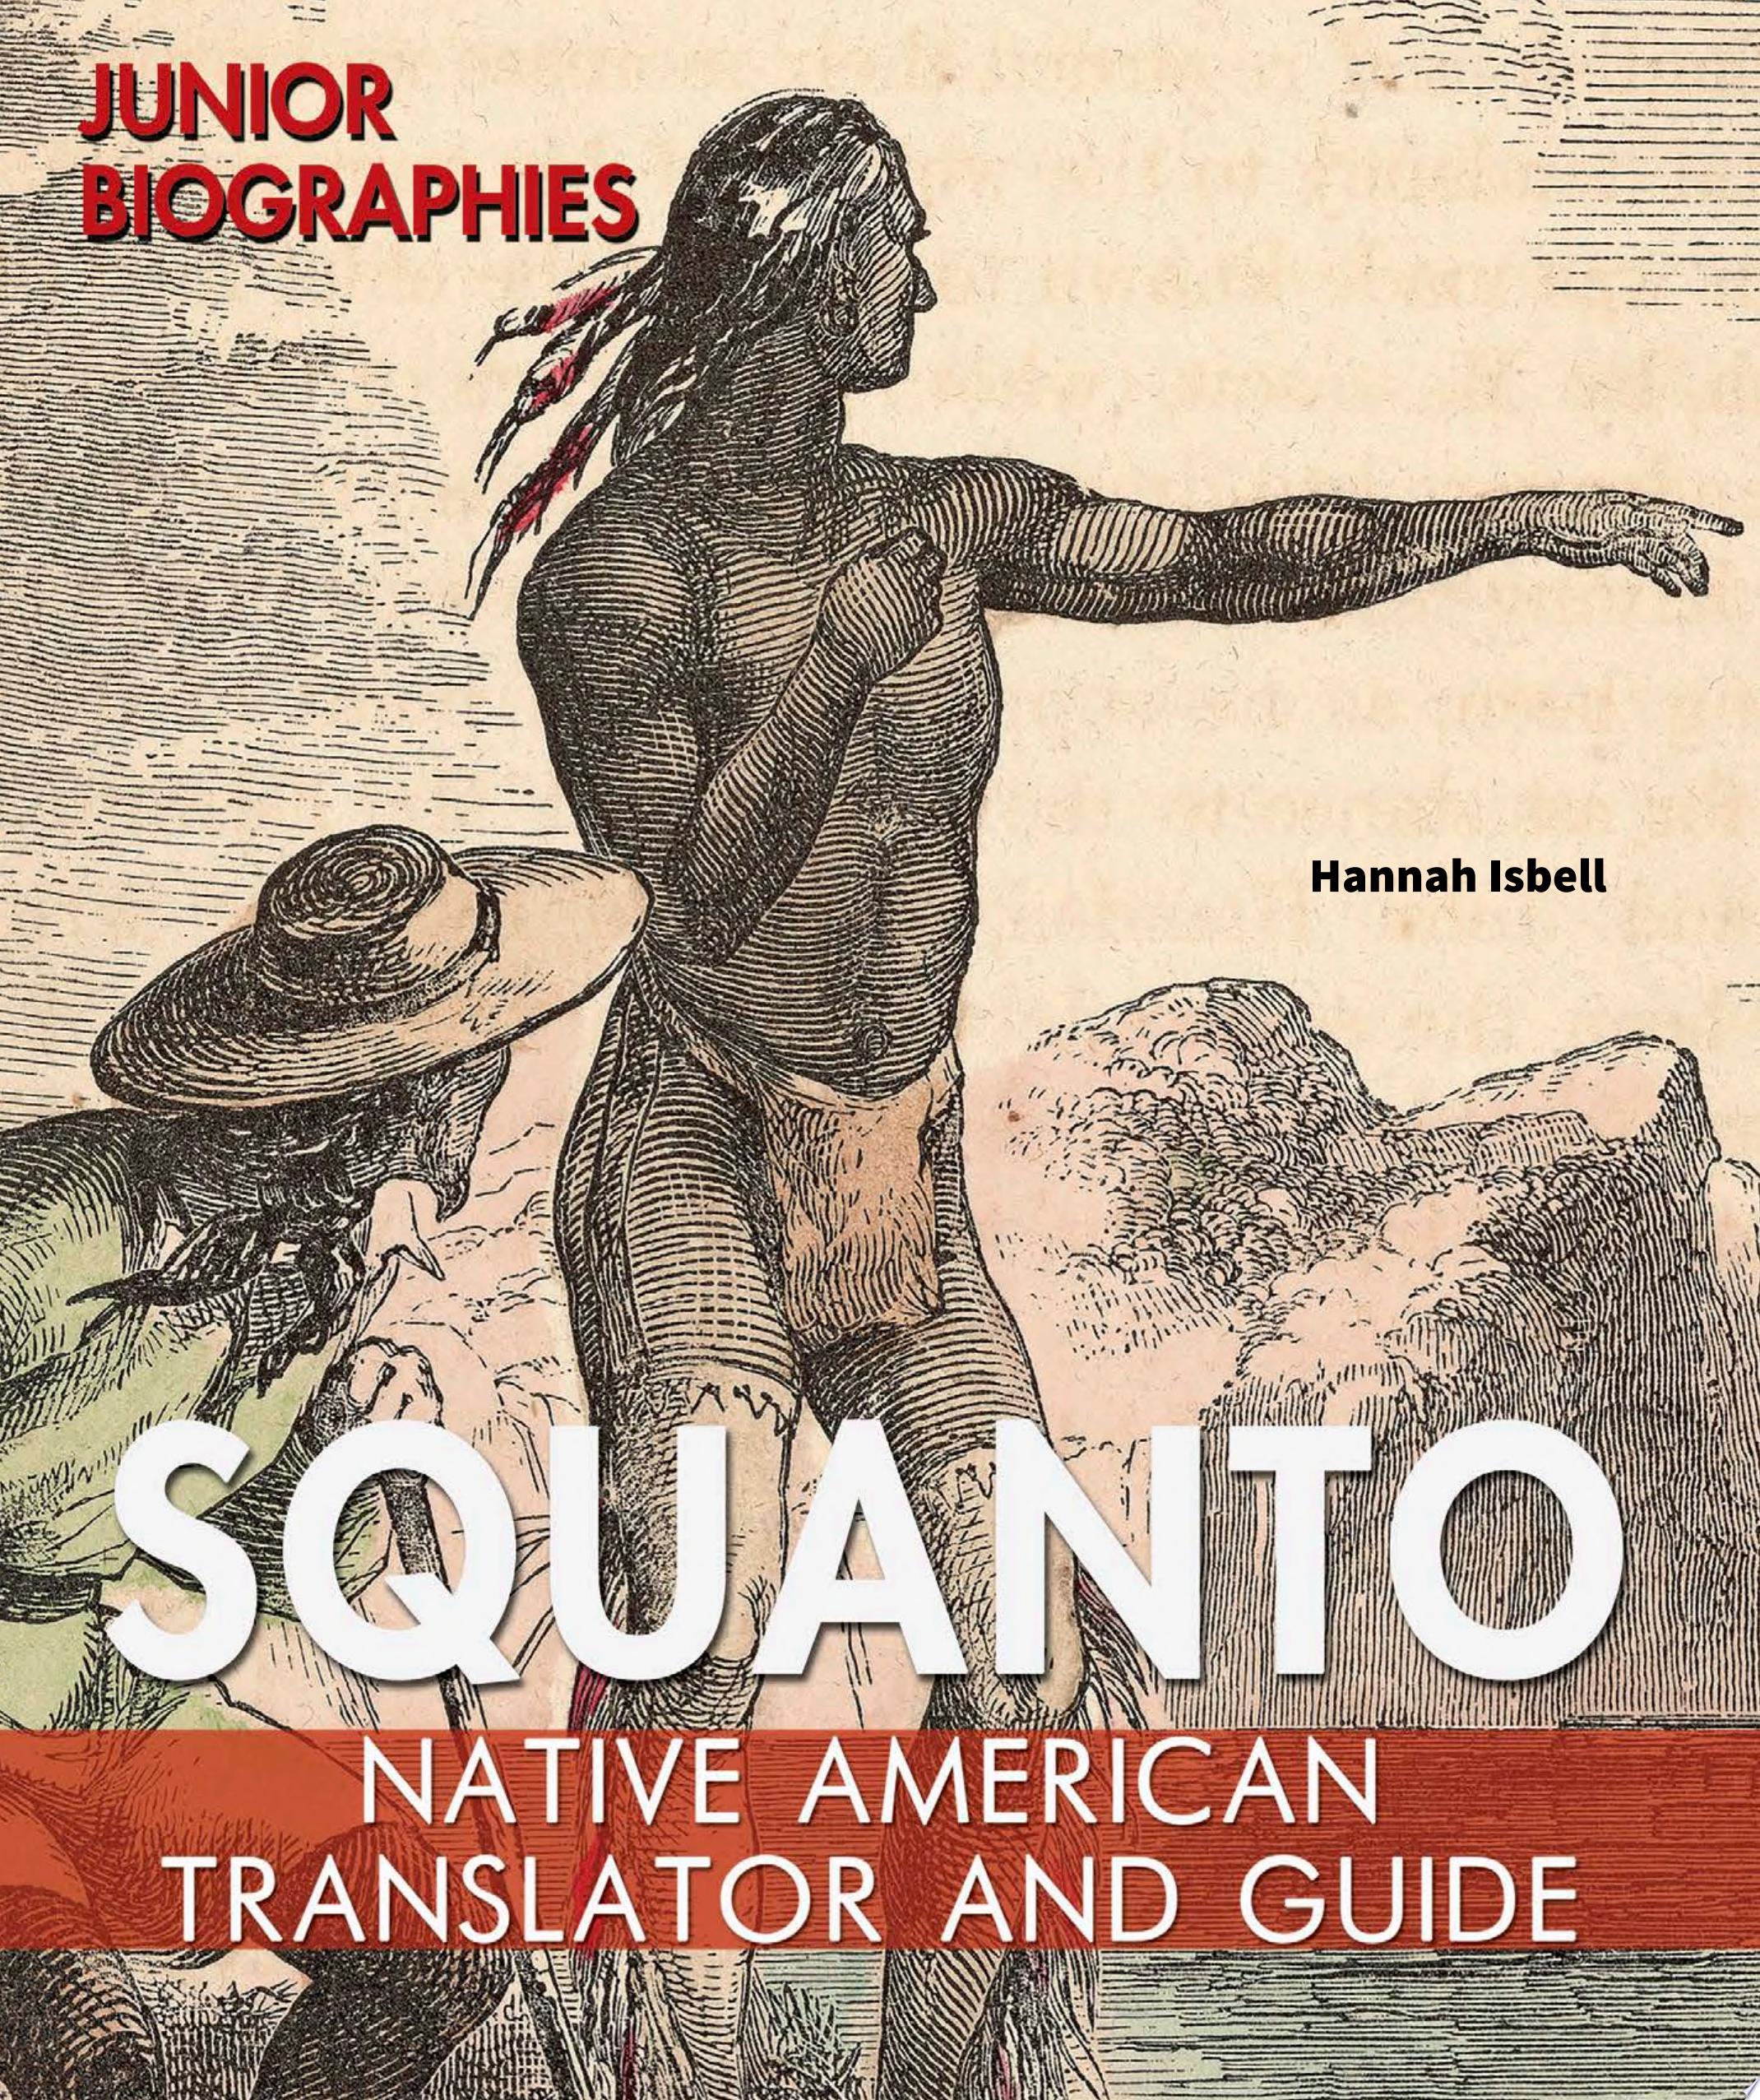 Image for "Squanto"